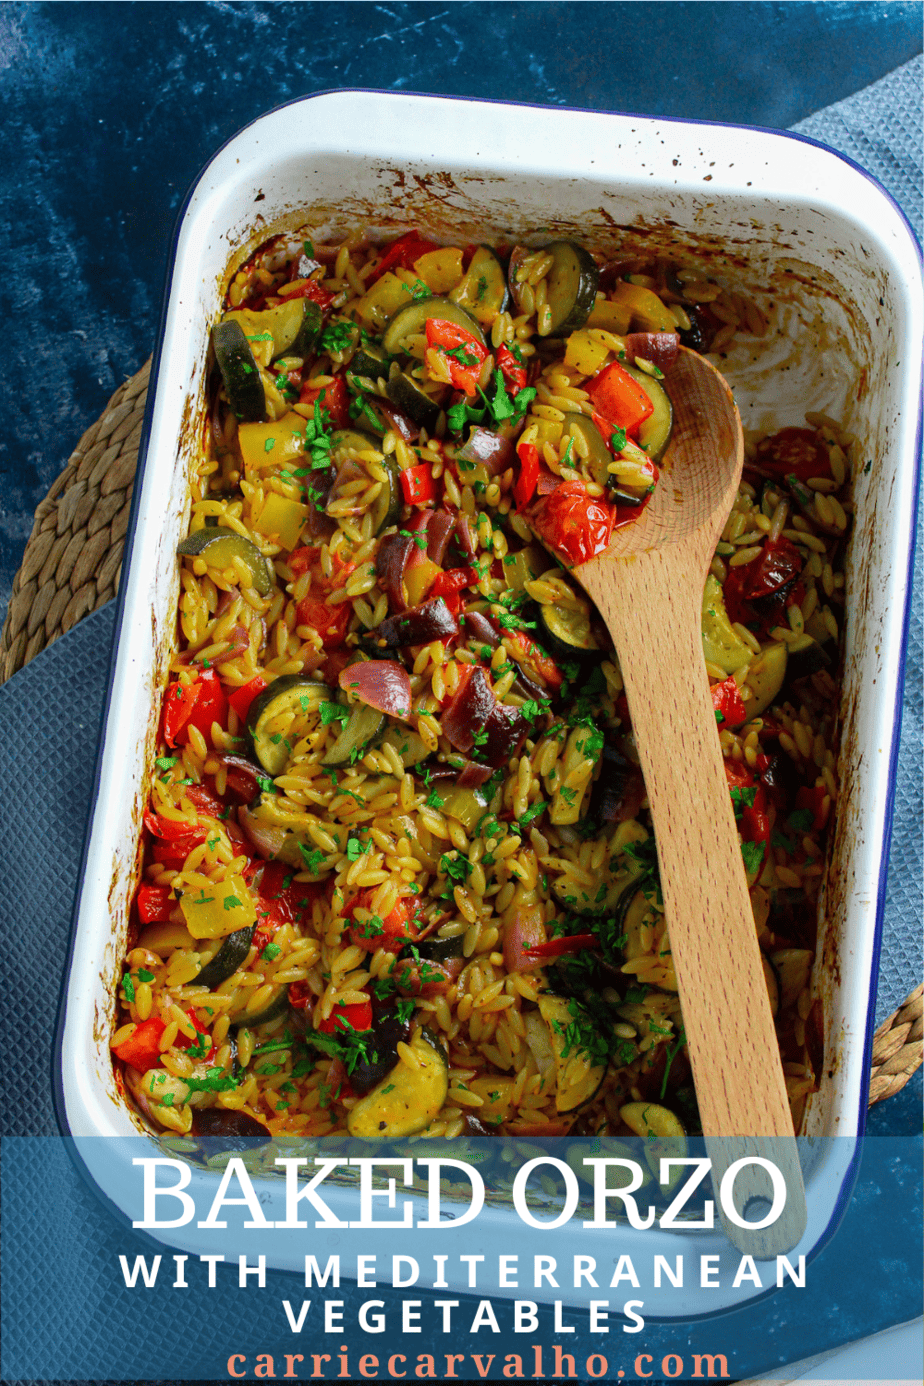 Baked Orzo with Roast Mediterranean Vegetables